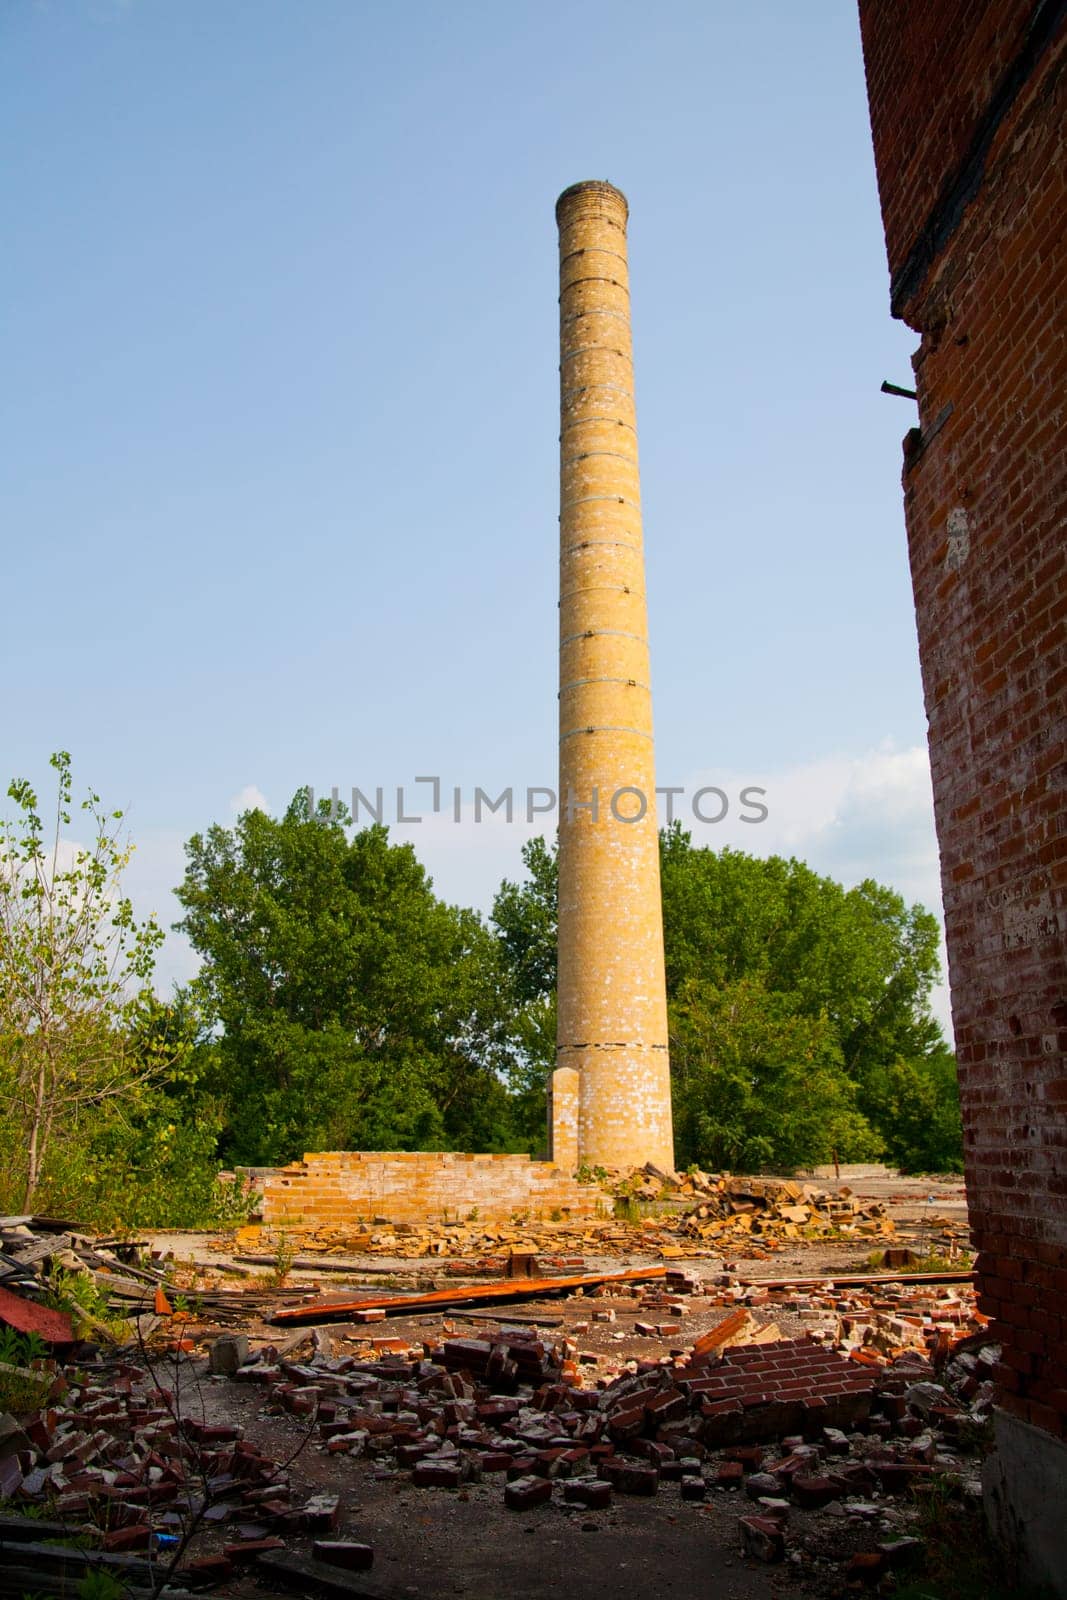 Decaying Industrial Chimney and Ruins Reclaimed by Nature in Pierceton, Indiana by njproductions